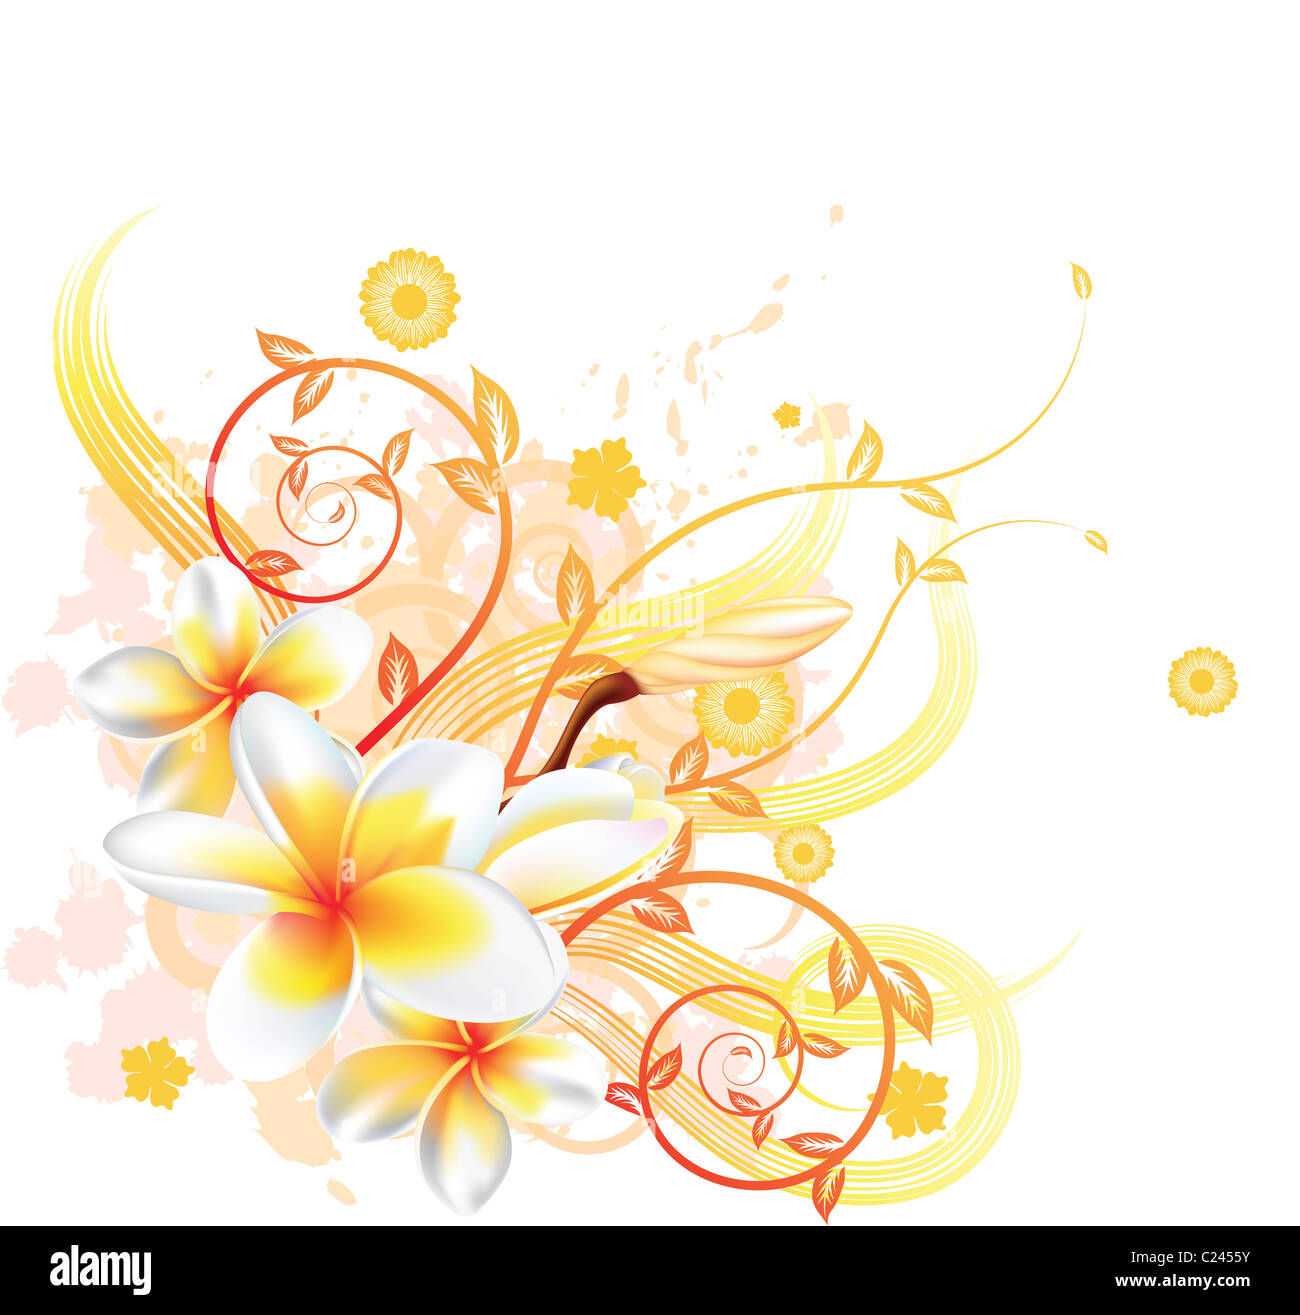 A very stylish vector floral background illustration with Plumeria Frangipani flowers. Stock Photo